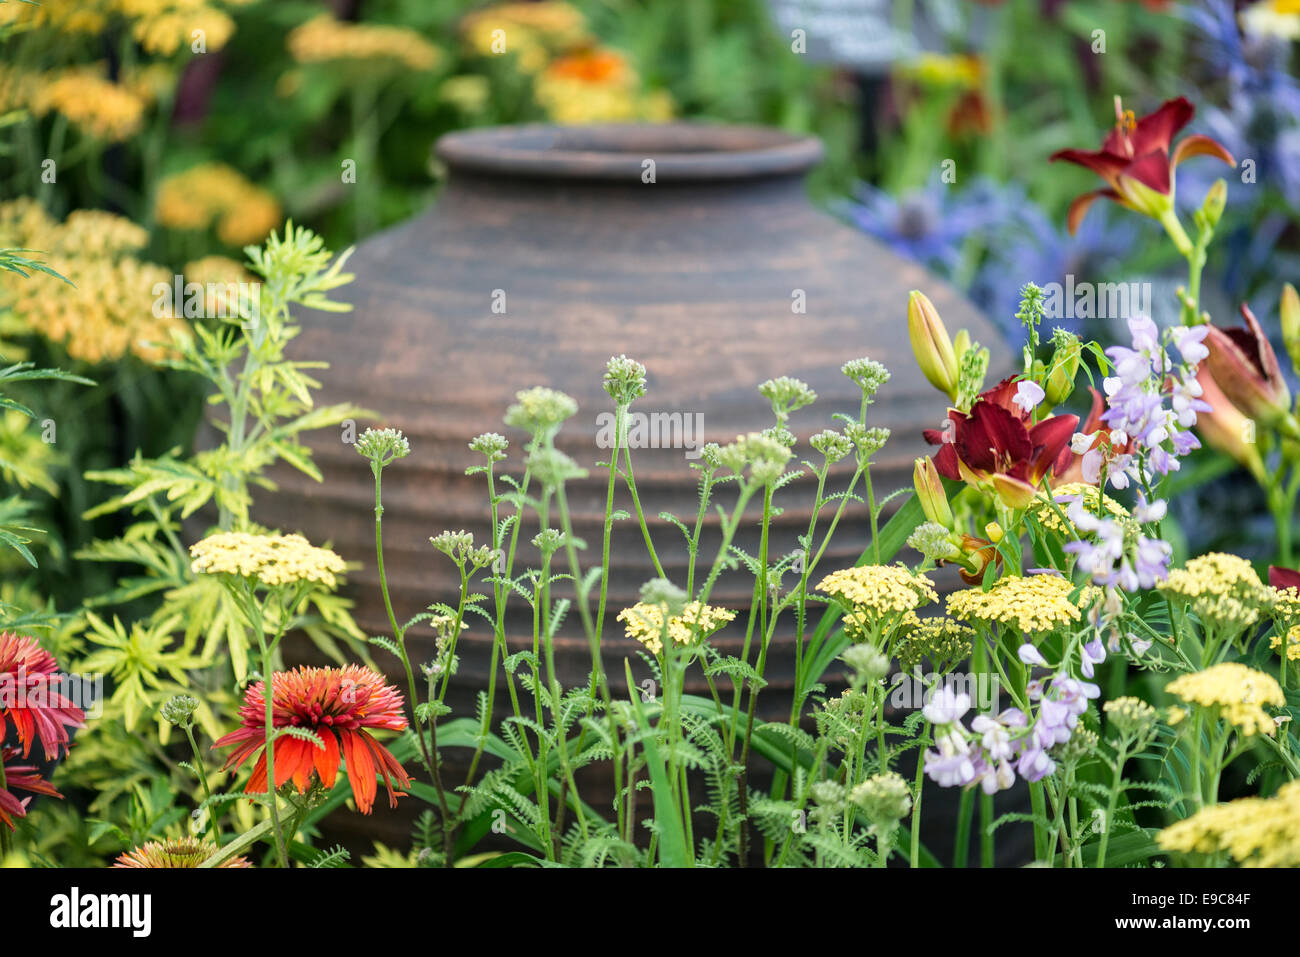 Wild flowers mixed, yellow, orange, crimson and blue around a copper colored urn. Stock Photo